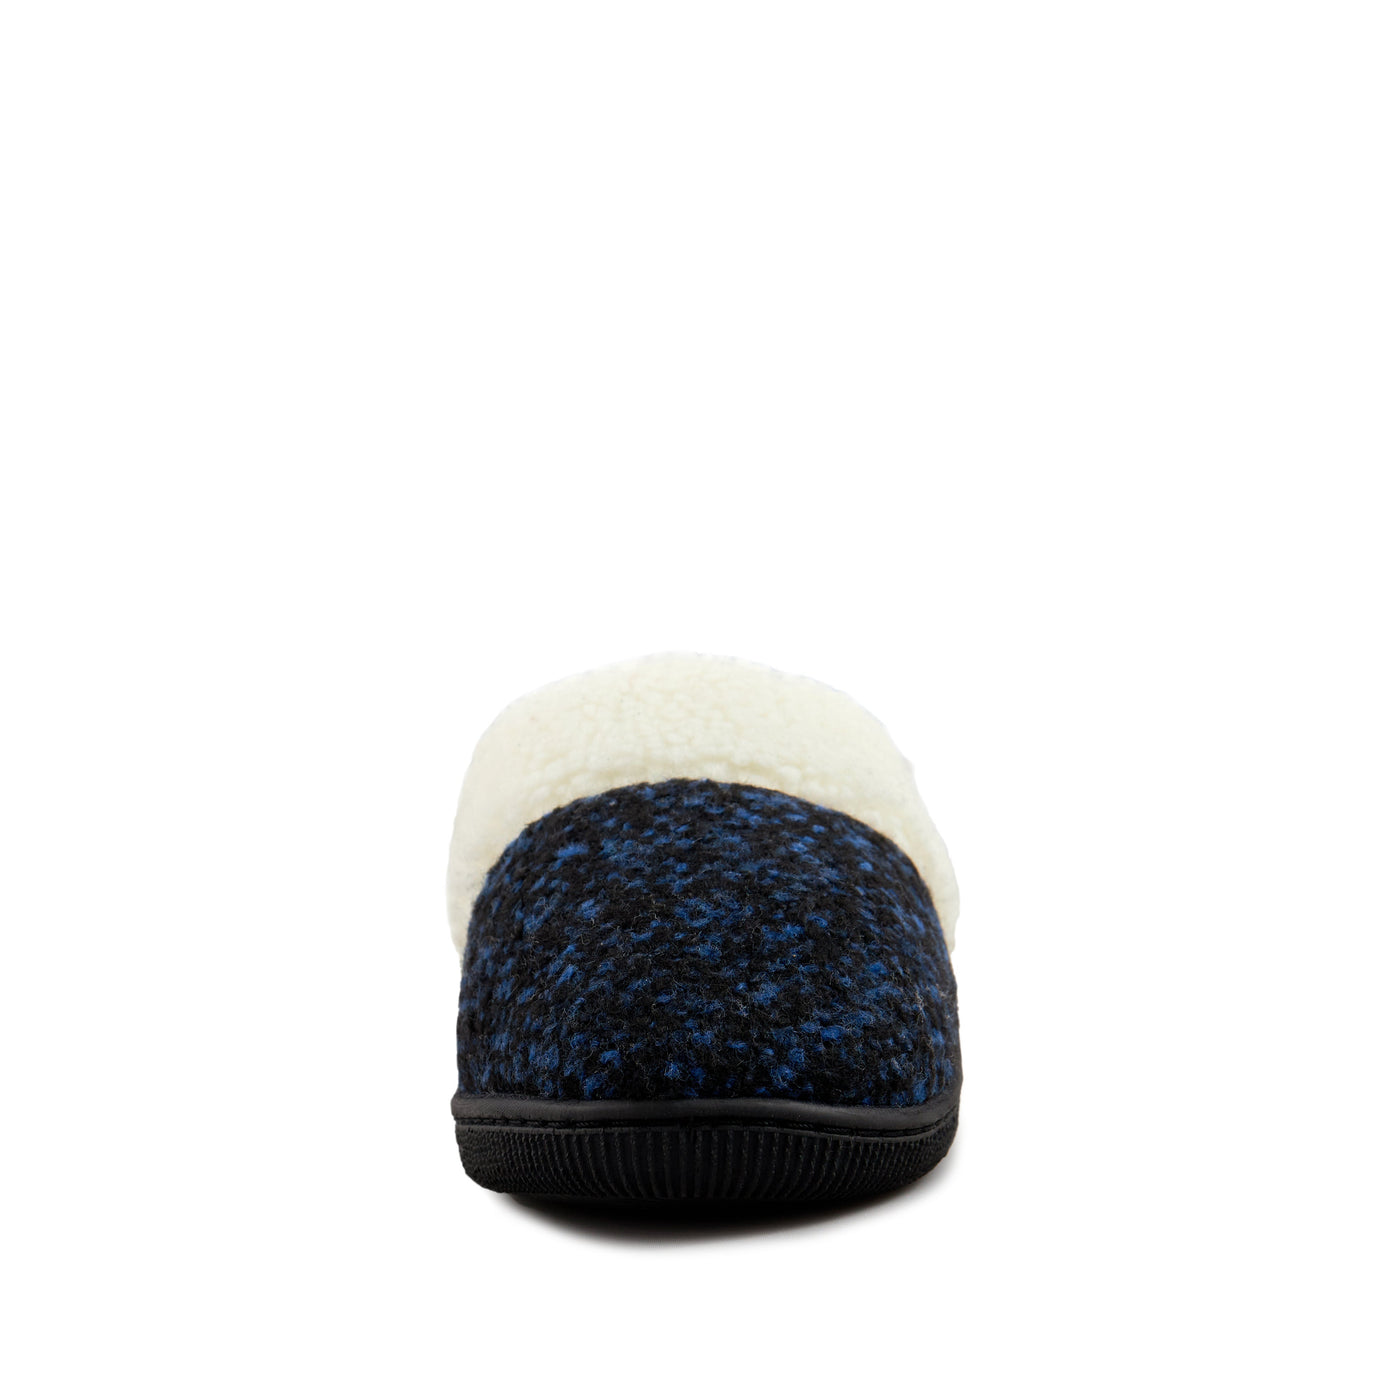 Women's Slippers Cozy Blue Crumble by Nest Shoes